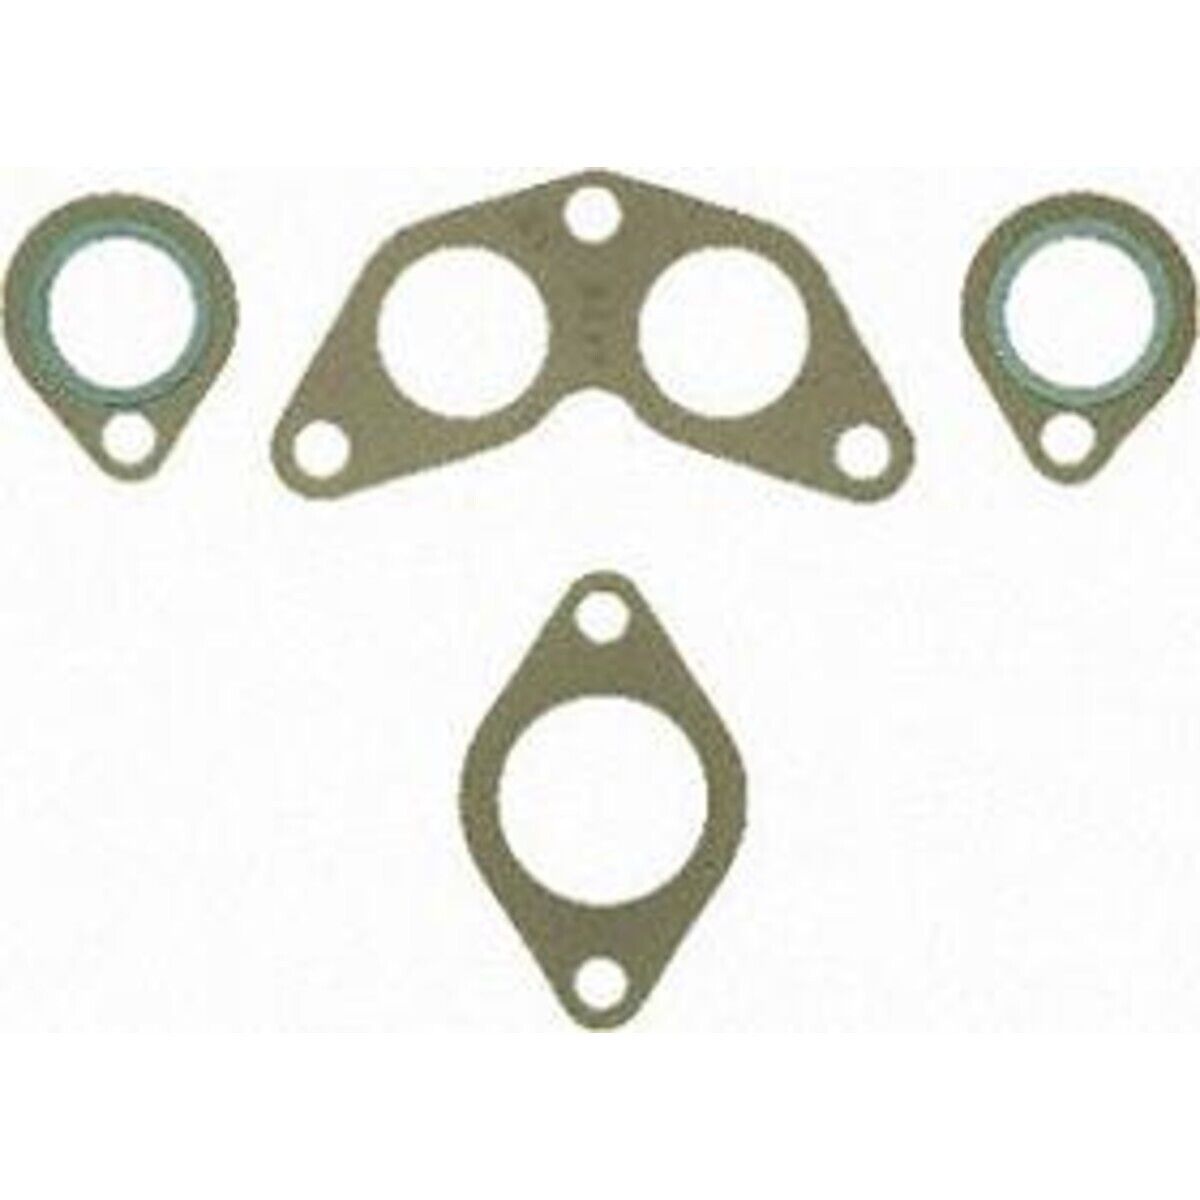 MS9027B Felpro Set Intake & Exhaust Manifold Gaskets for Jeep CJ5 Jeepster 475